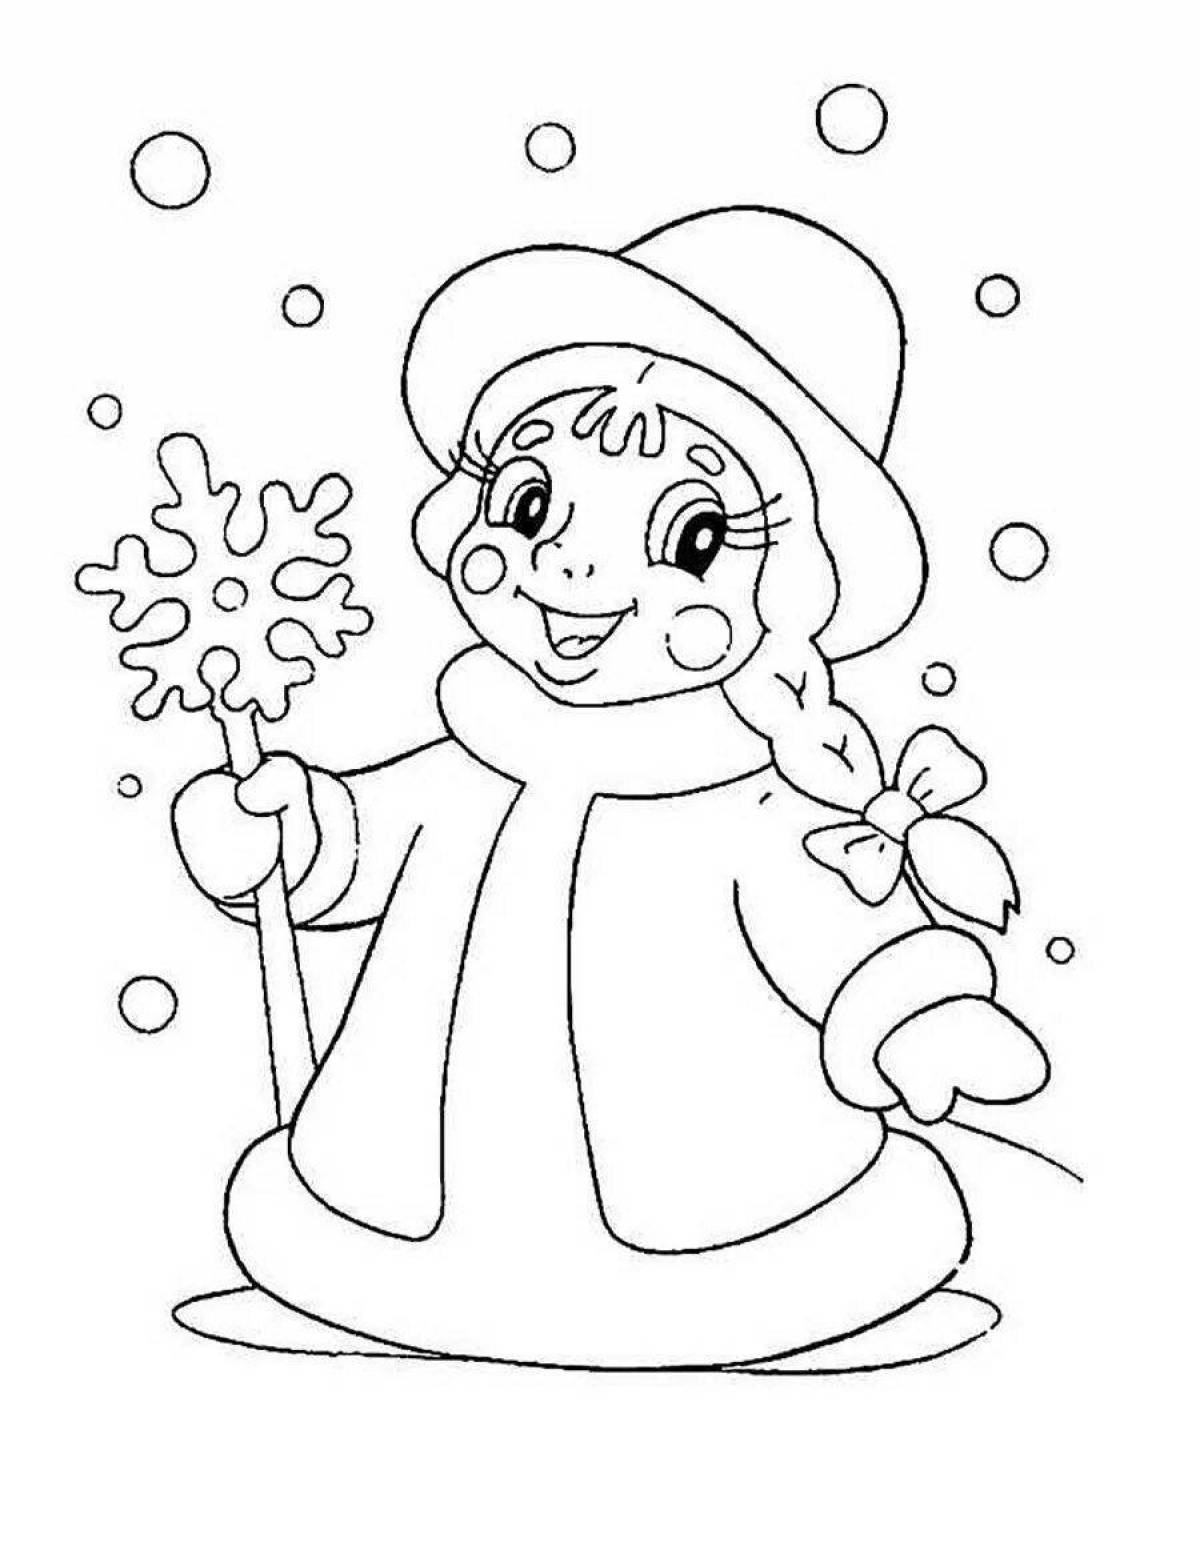 Adorable snow maiden face coloring page